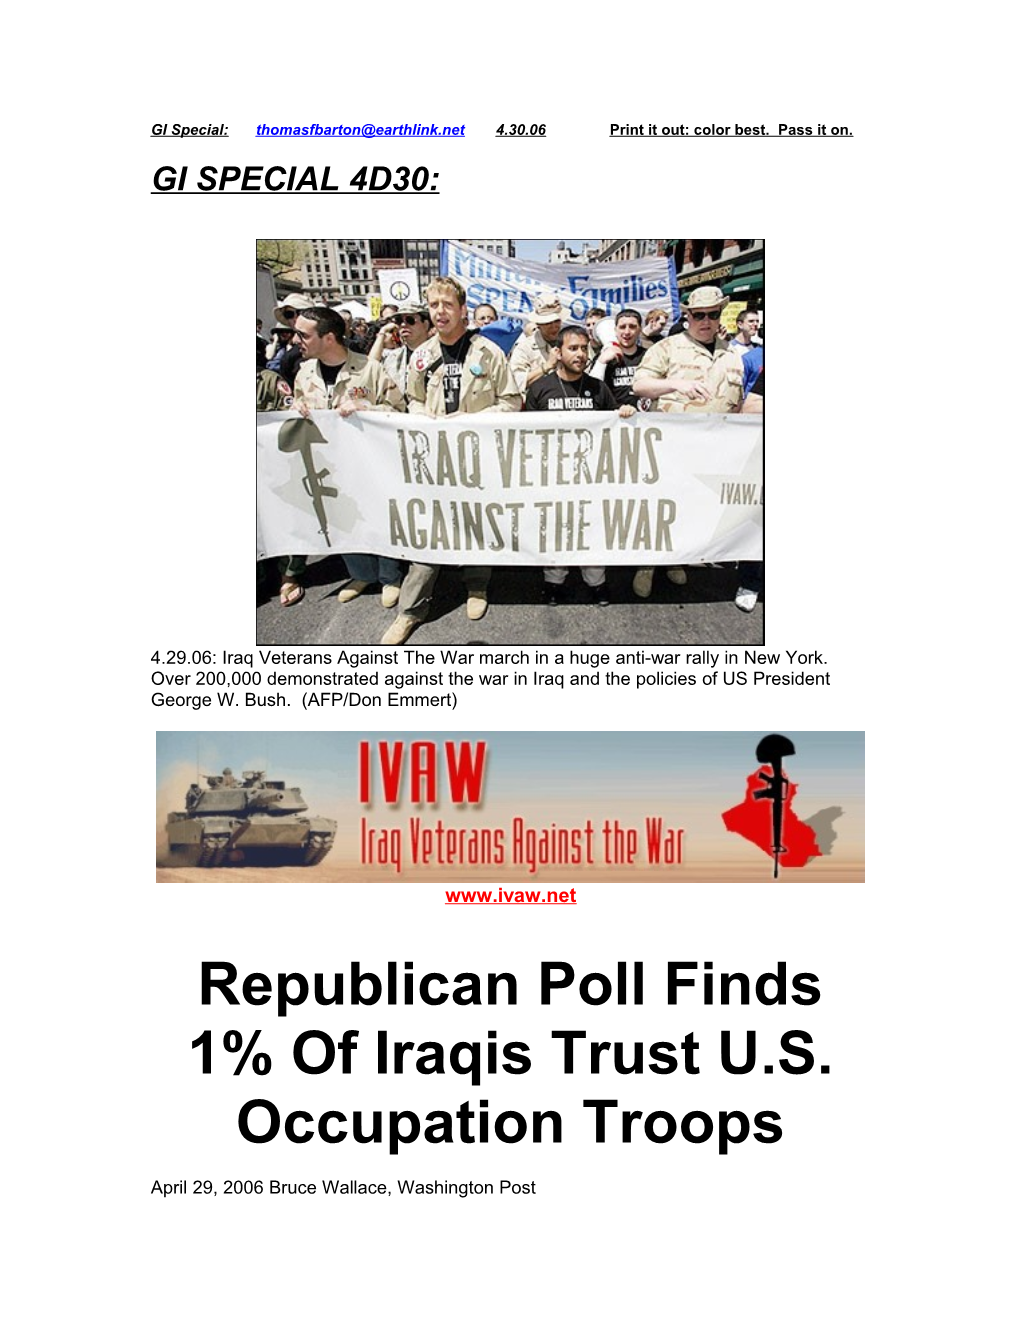 Republican Poll Finds 1% of Iraqis Trust U.S. Occupation Troops